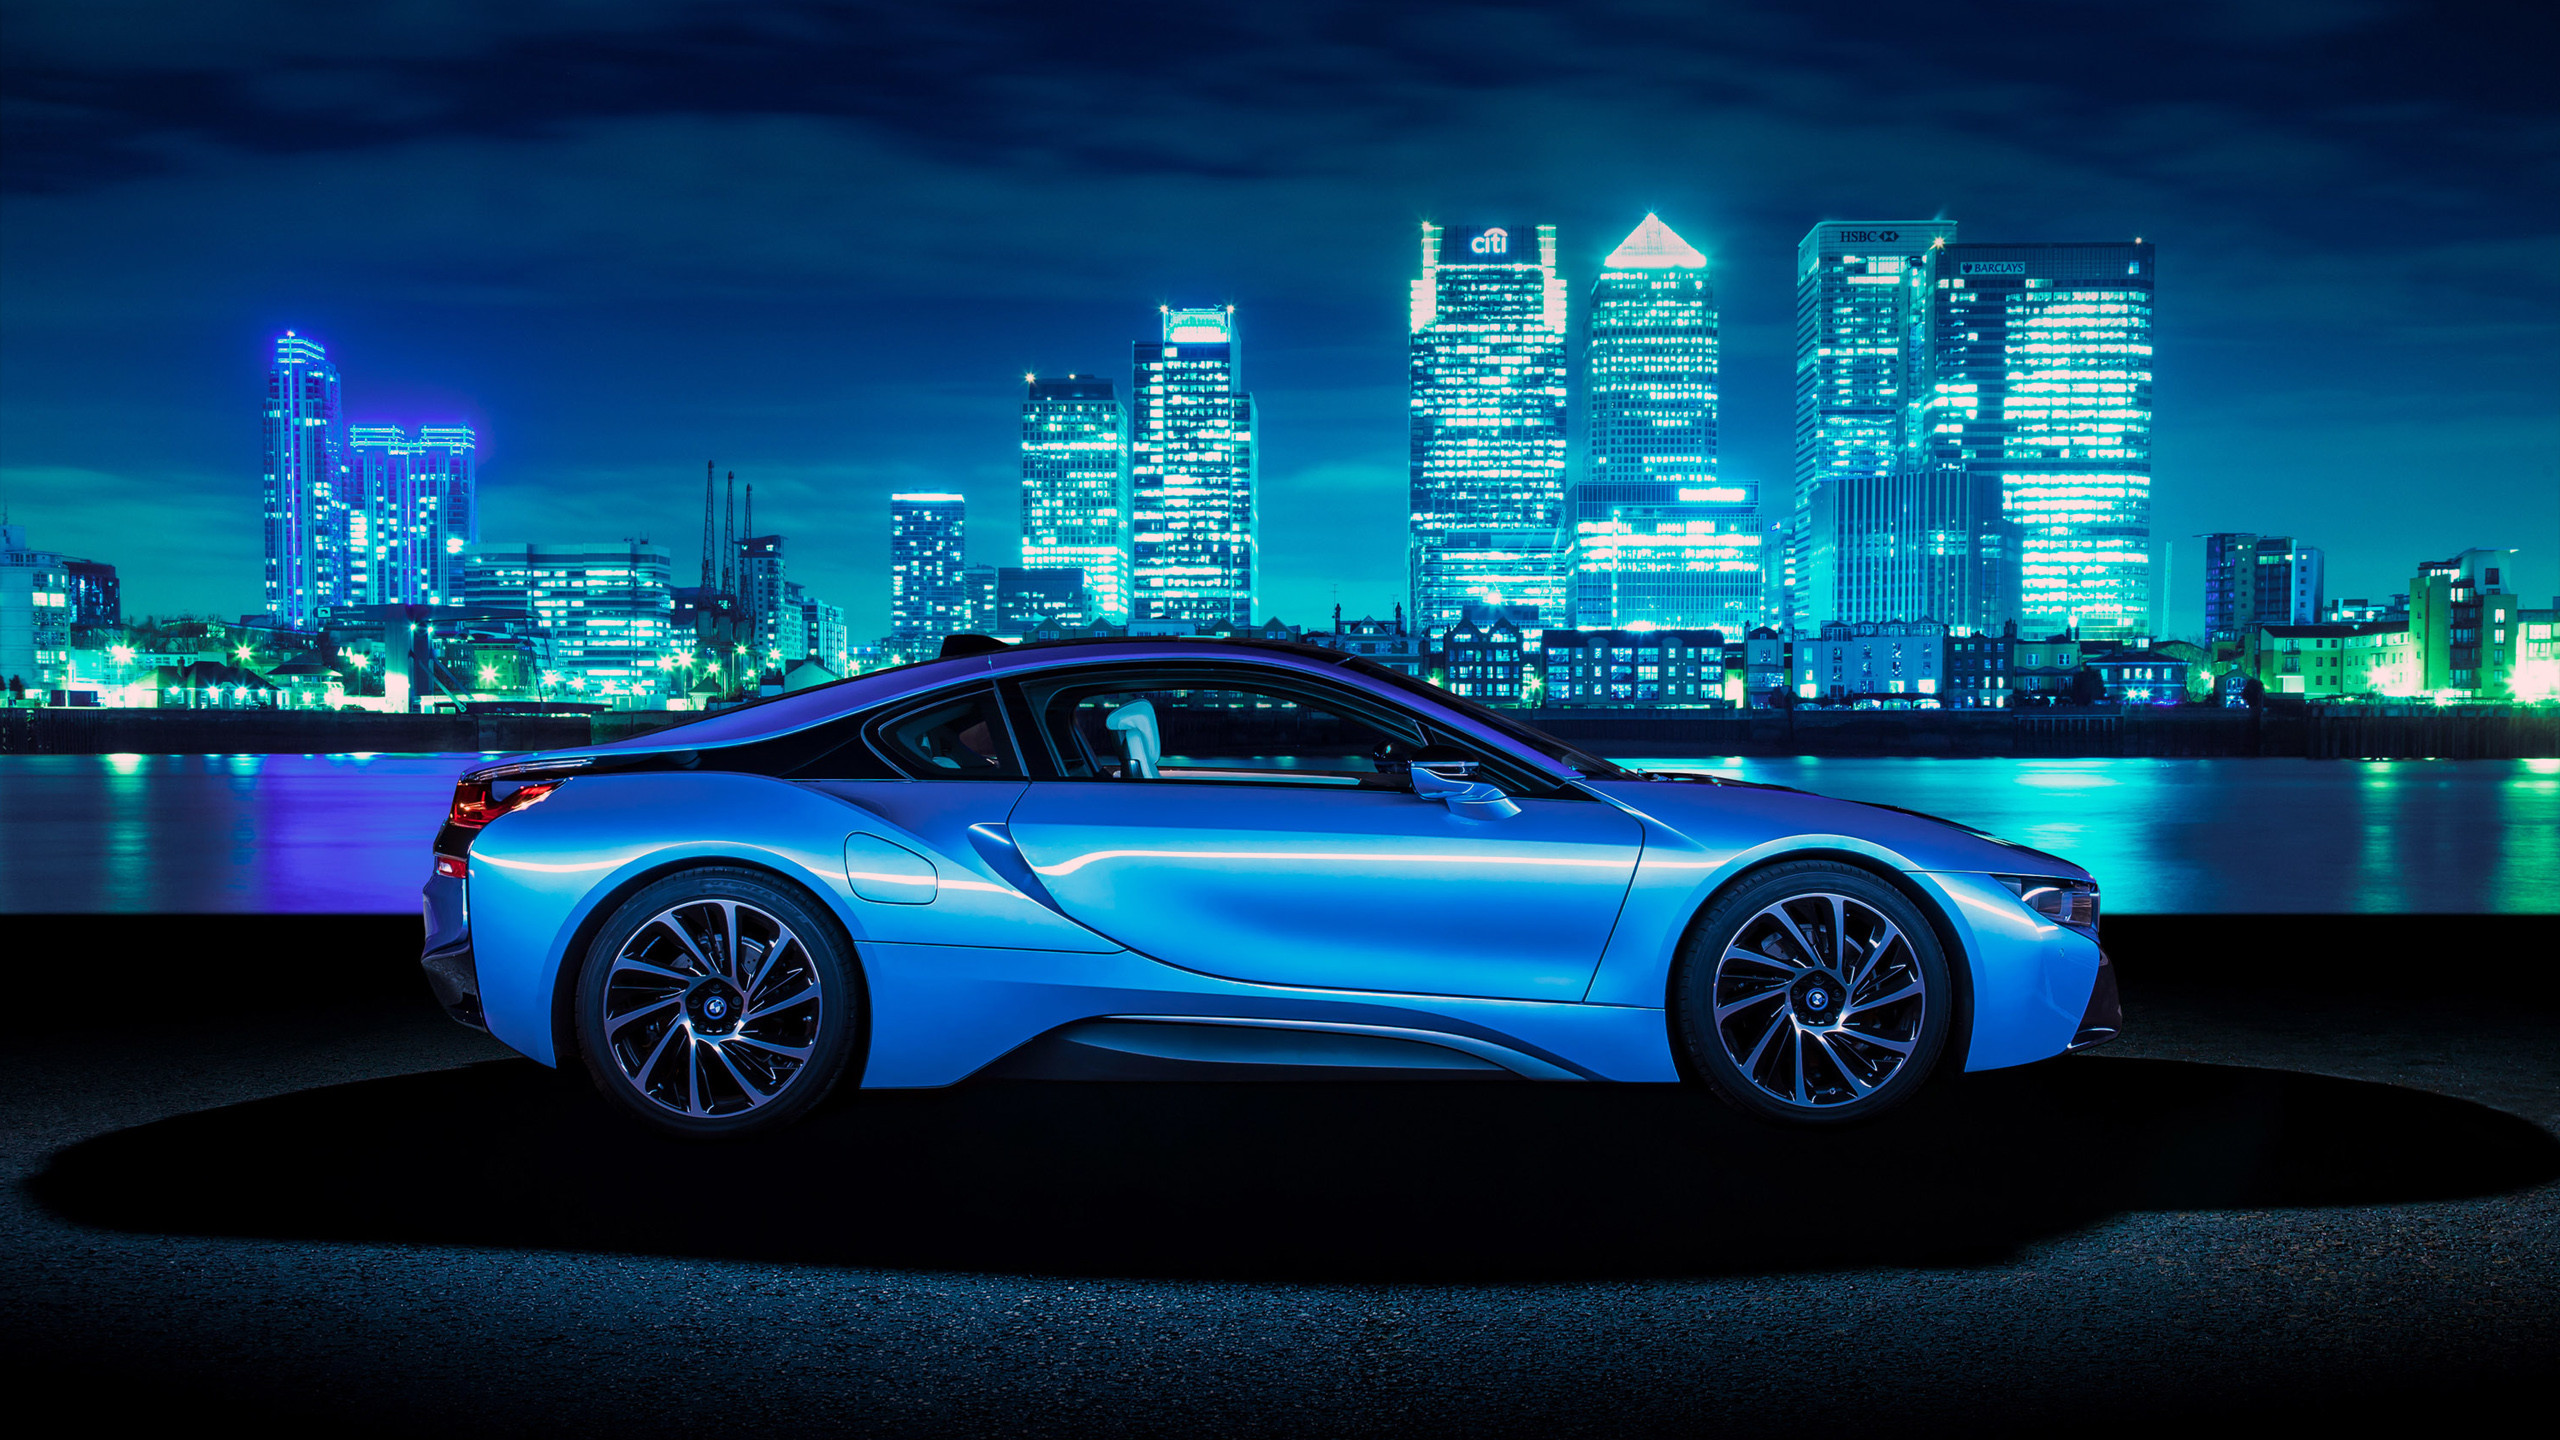 2560x1440 wallpaper.wiki-Bmw-I8-Backgrounds-Free-Download-PIC-